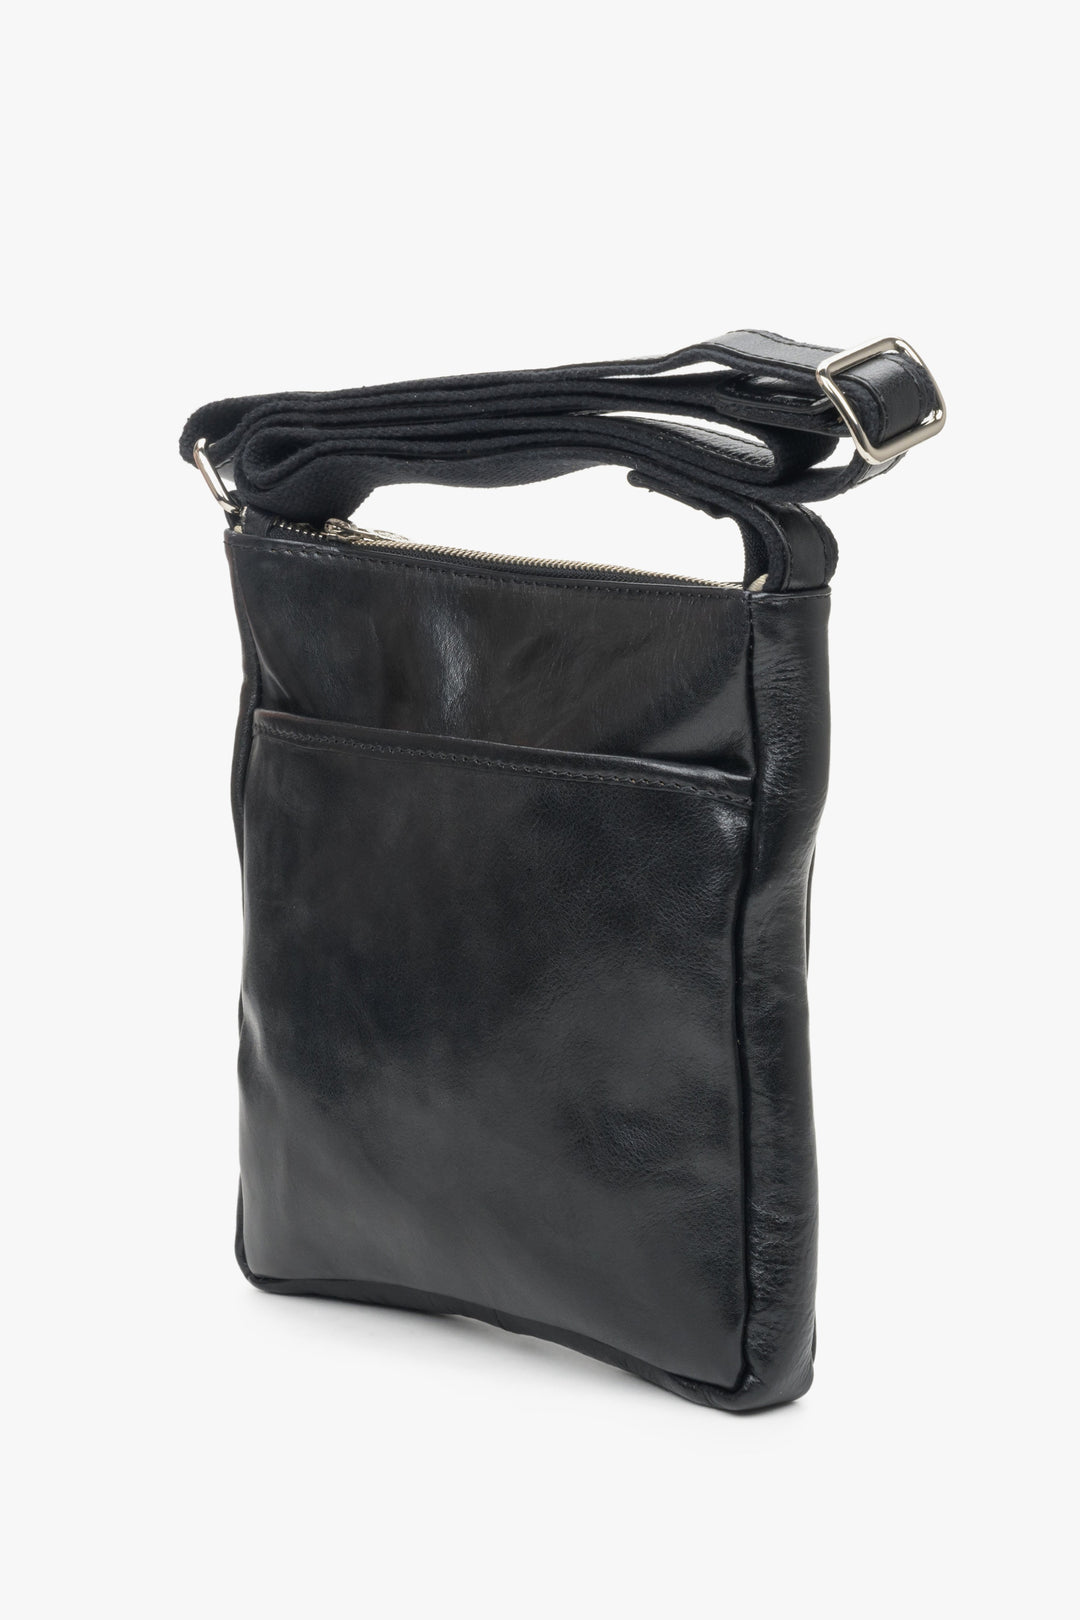 Men's bag made of genuine leather - side view.